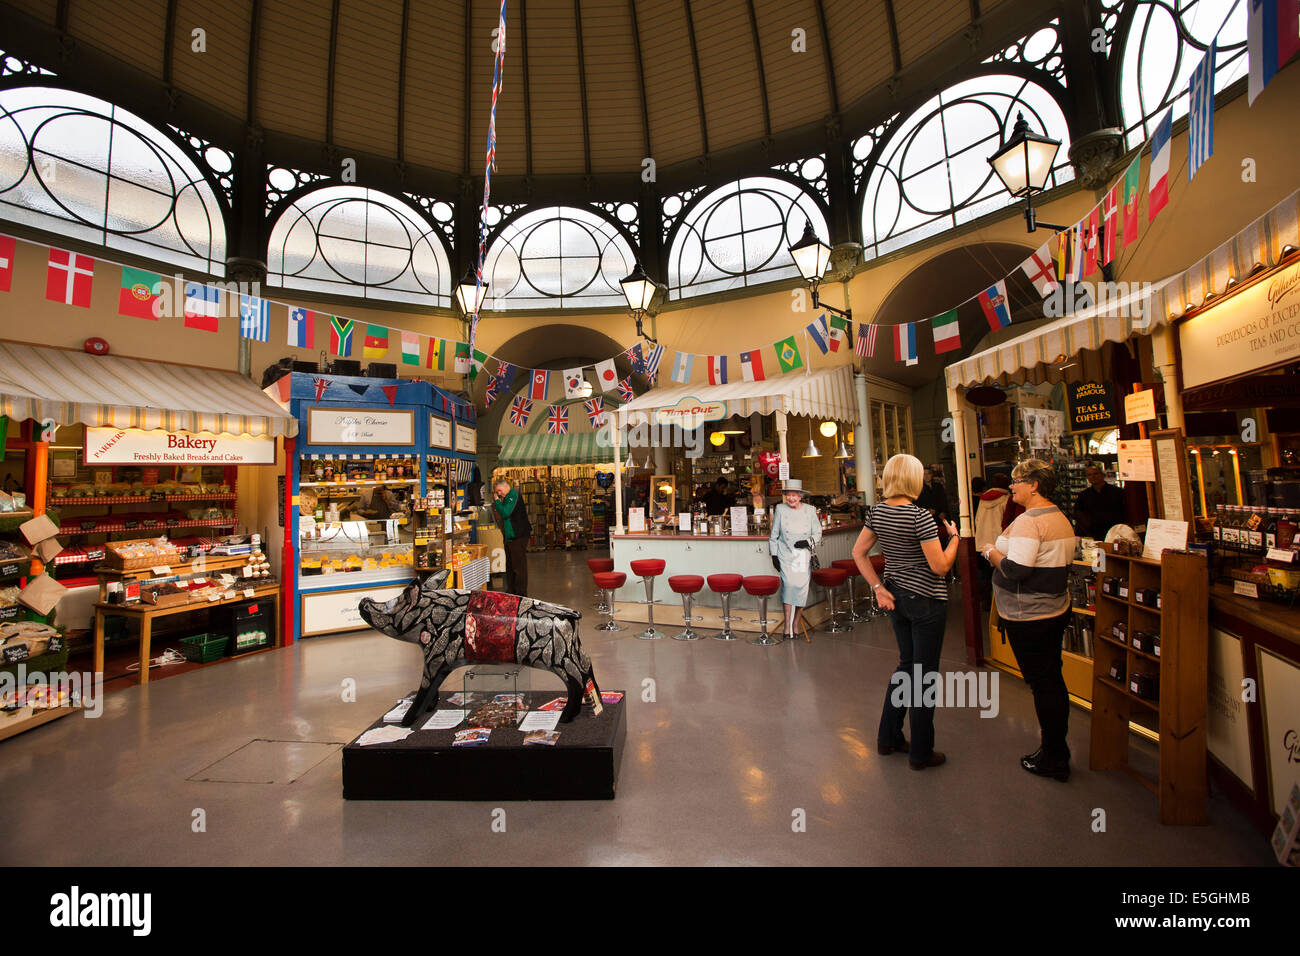 UK, England, Wiltshire, Bath, Guildhall Market stalls under central dome Stock Photo